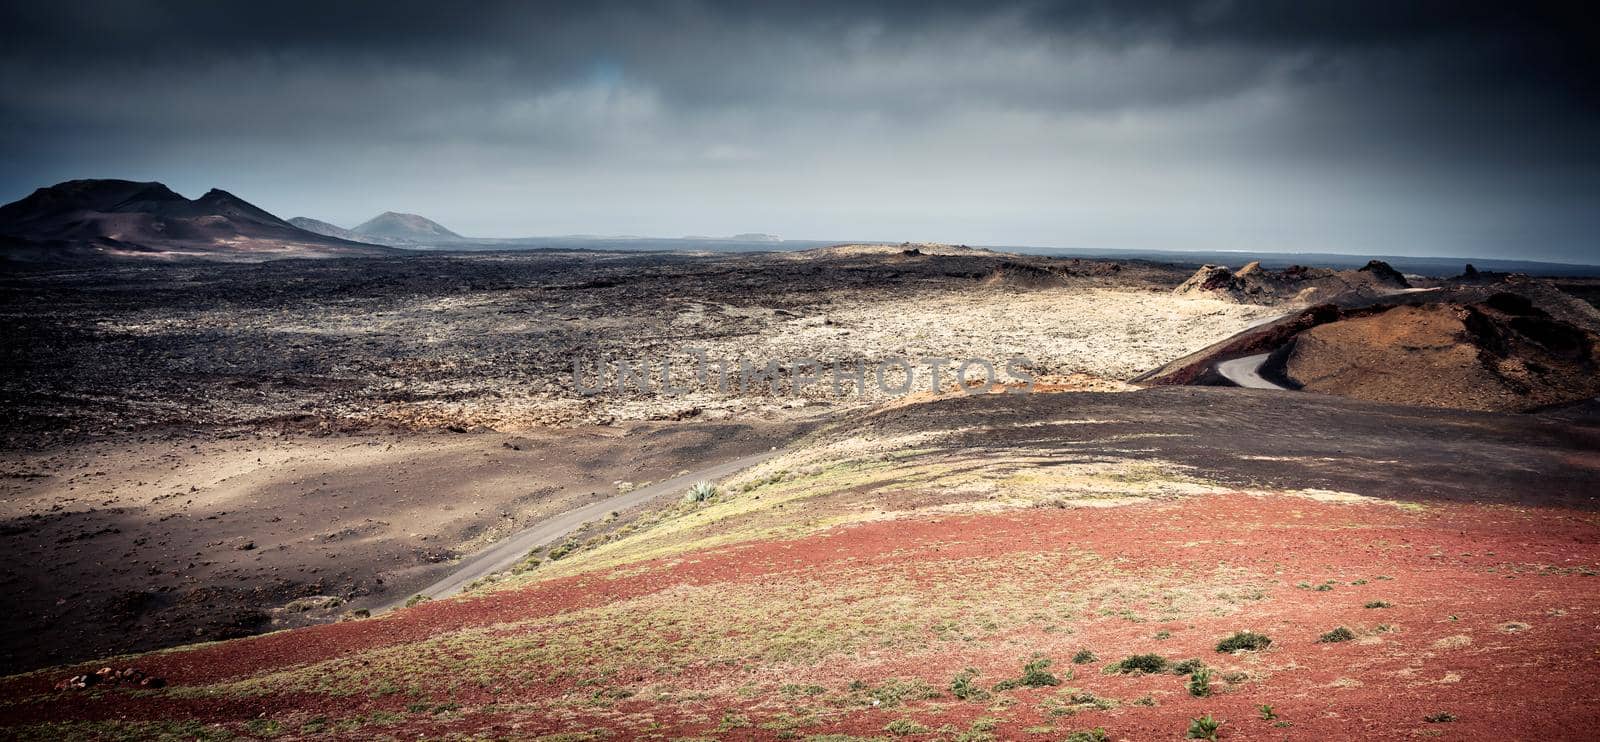 beautiful mountain landscape with volcanoes in Timanfaya National Park in Lanzarote, Canary Islands